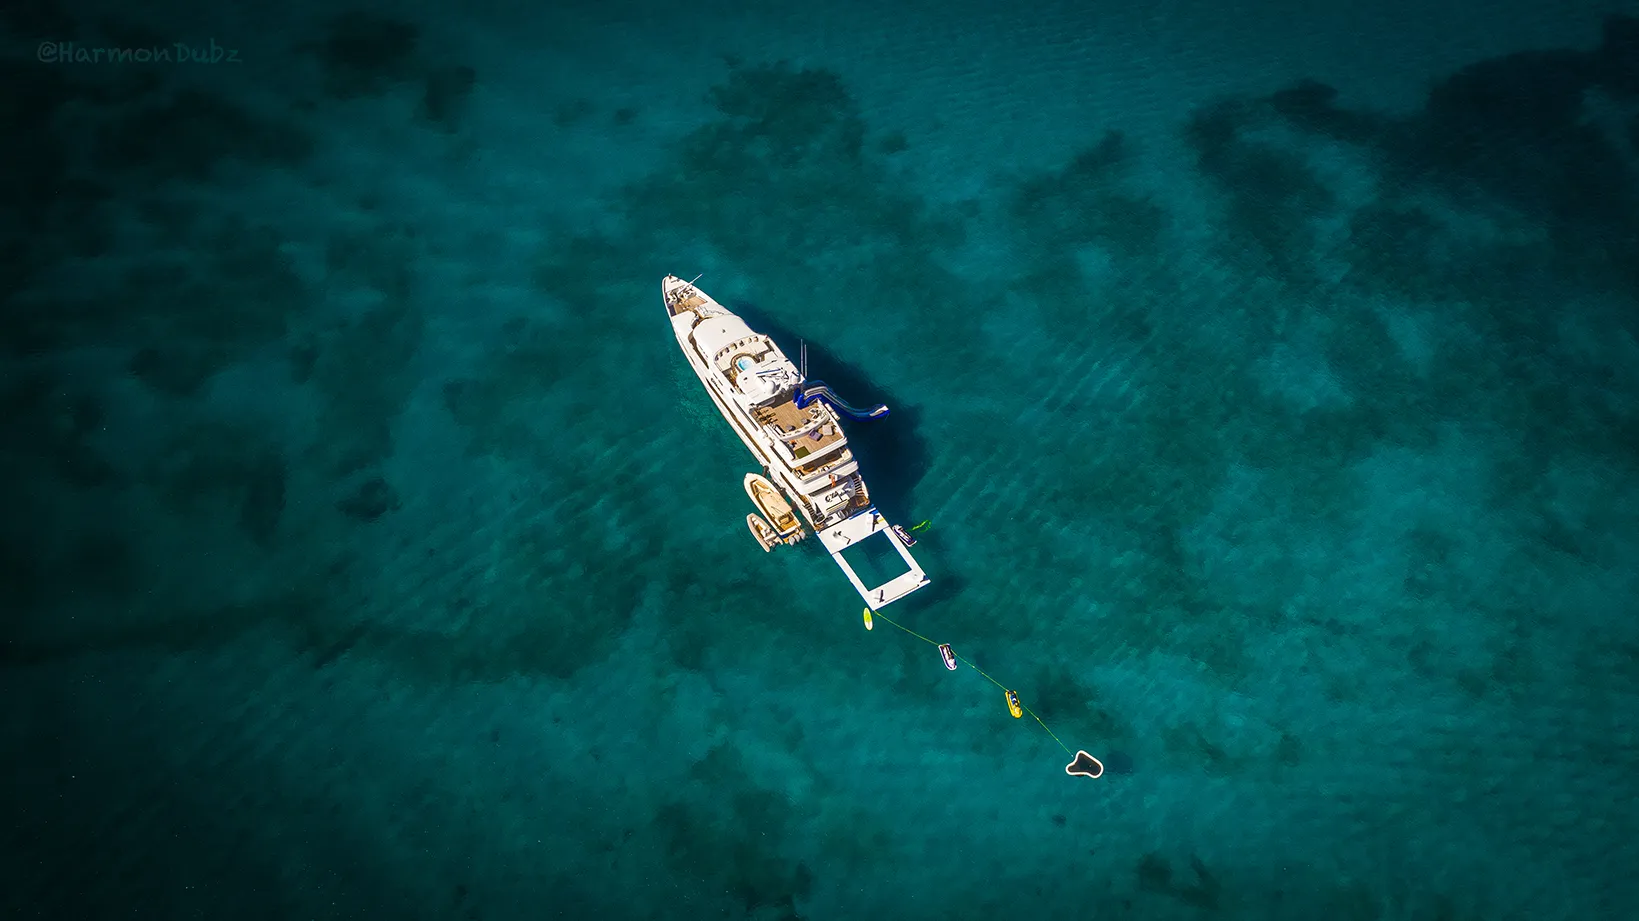 Yacht Golf and Sea Pool charter yacht MY Milestone view from drone in blue ocean